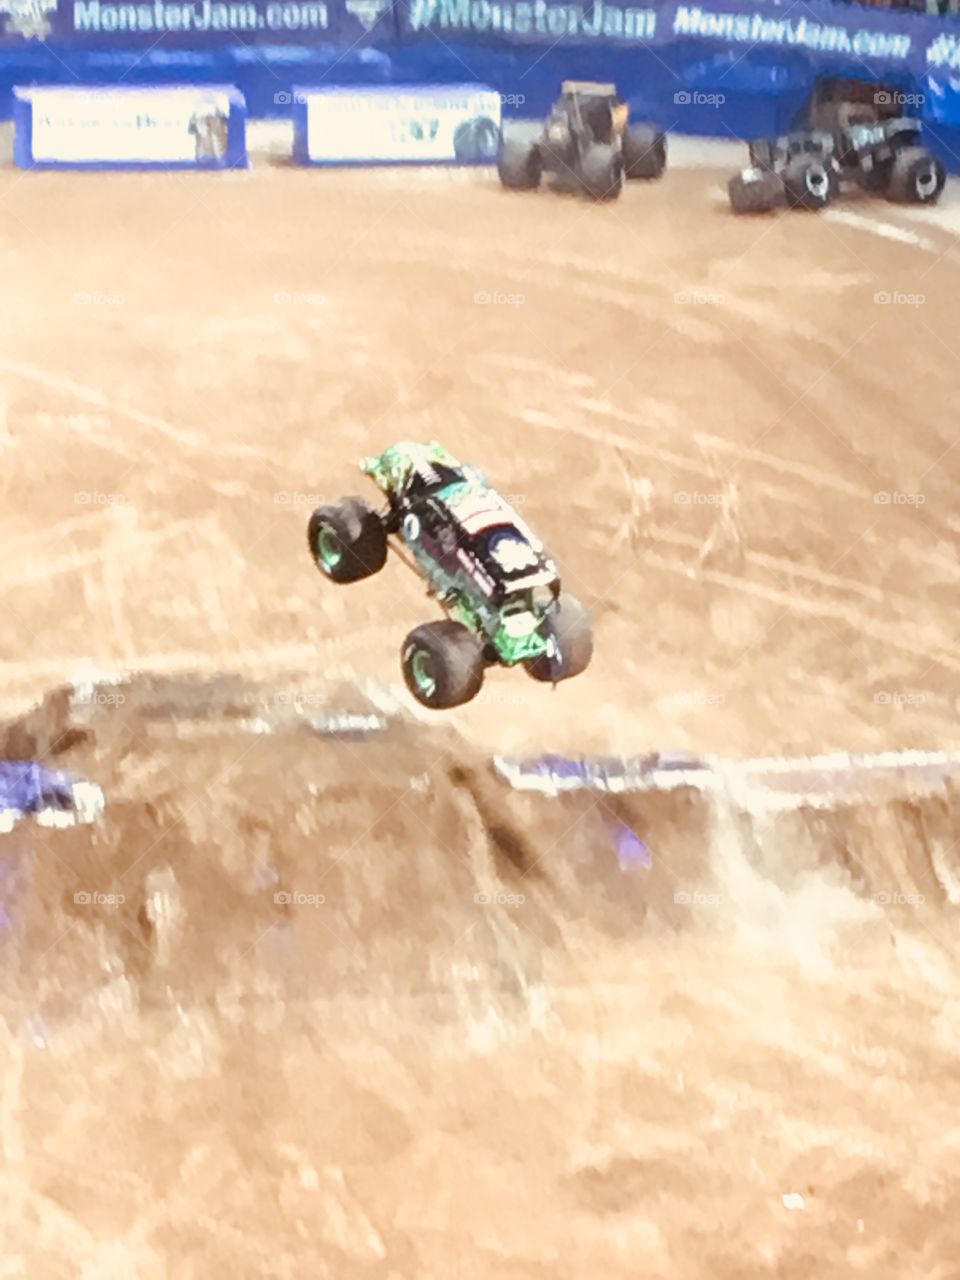 Over the hill in a monster truck